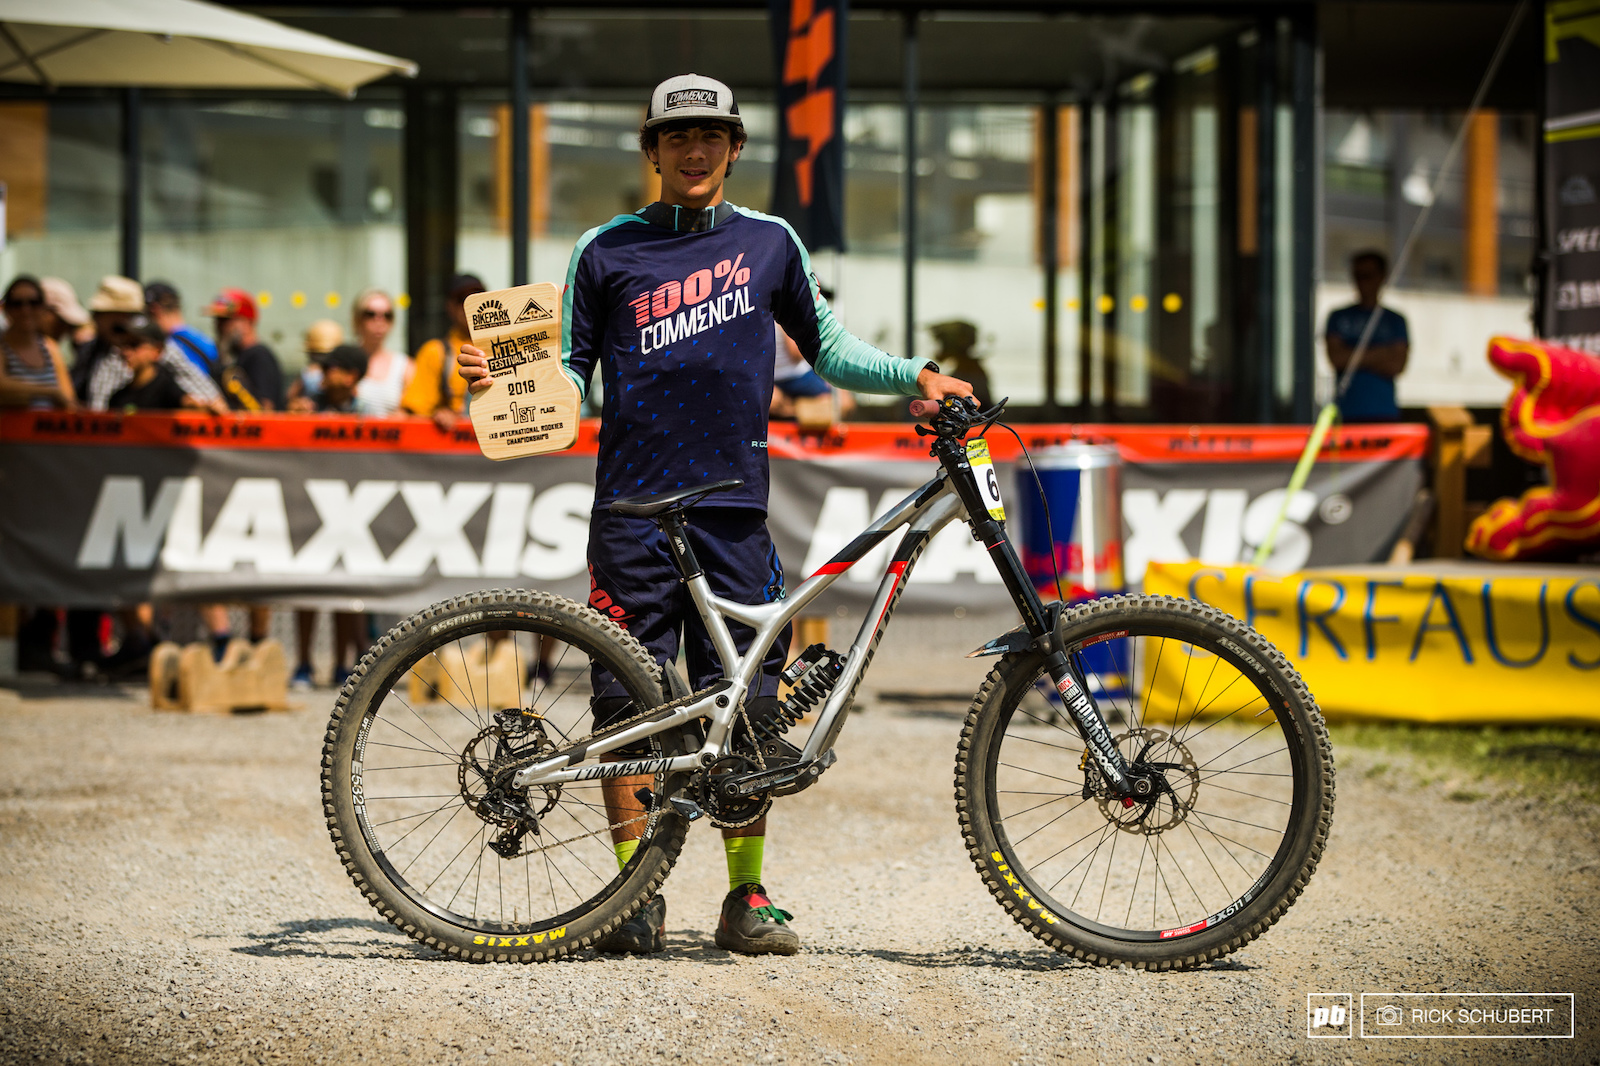 Nuno Zuzarte Reis was the man of the day winning the hardest fought category and taking back-to-back titles